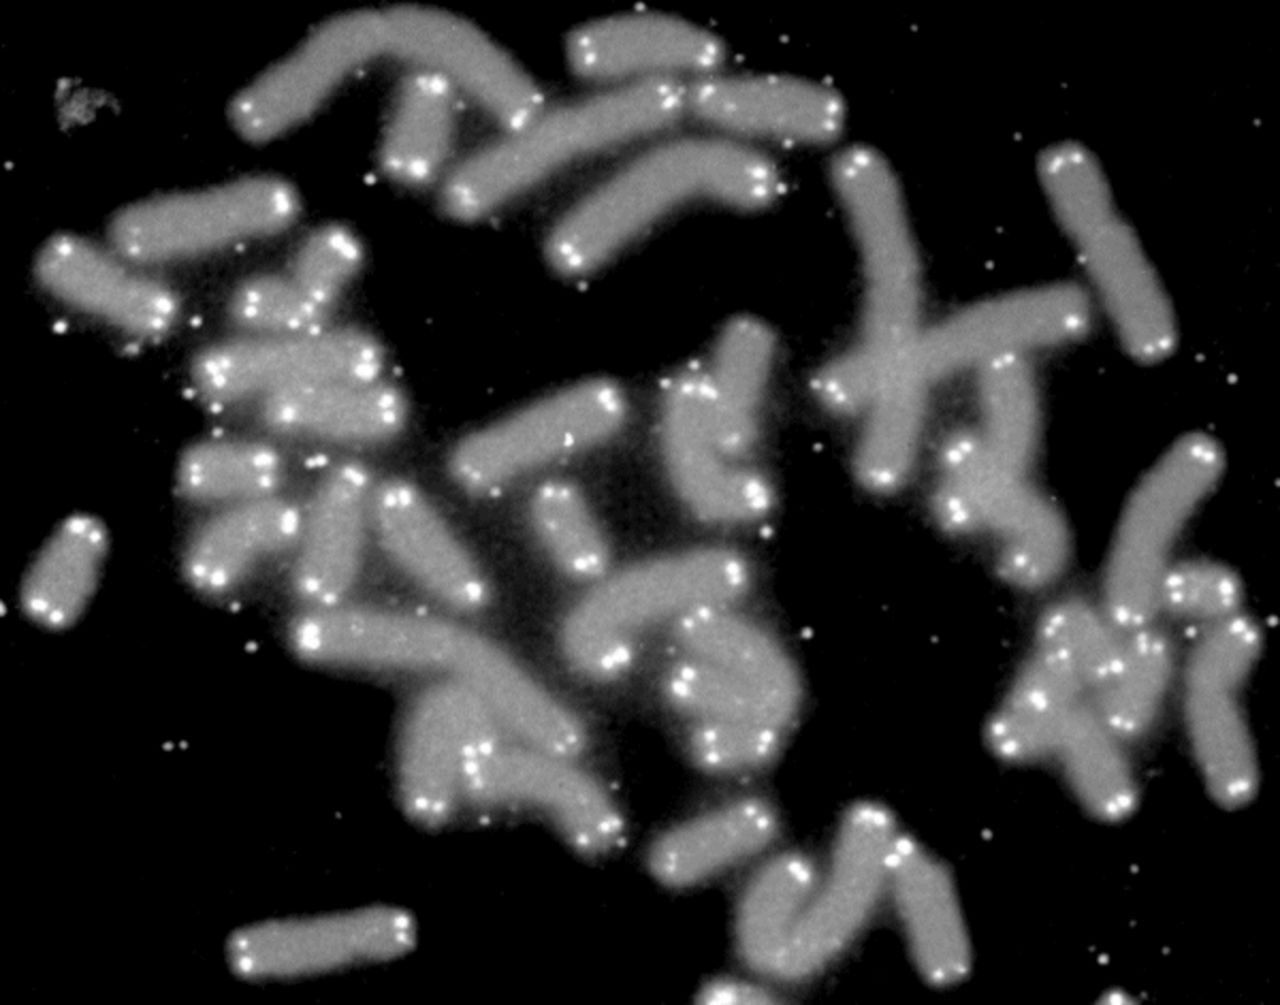 Telomeres are the ends of a chromosome that protect cells against degradation. According to researchers if we can work out a way to preserve telomeres, then we would be another step closer to defeating aging. Dr Aziz Aboobaker from Nottingham University's School of Biology, said: "Usually when stem cells divide -- to heal wounds, or during reproduction or for growth -- they start to show signs of aging. This means that the stem cells are no longer able to divide and so become less able to replace exhausted specialized cells in the tissues of our bodies. Our aging skin is perhaps the most visible example of this effect."